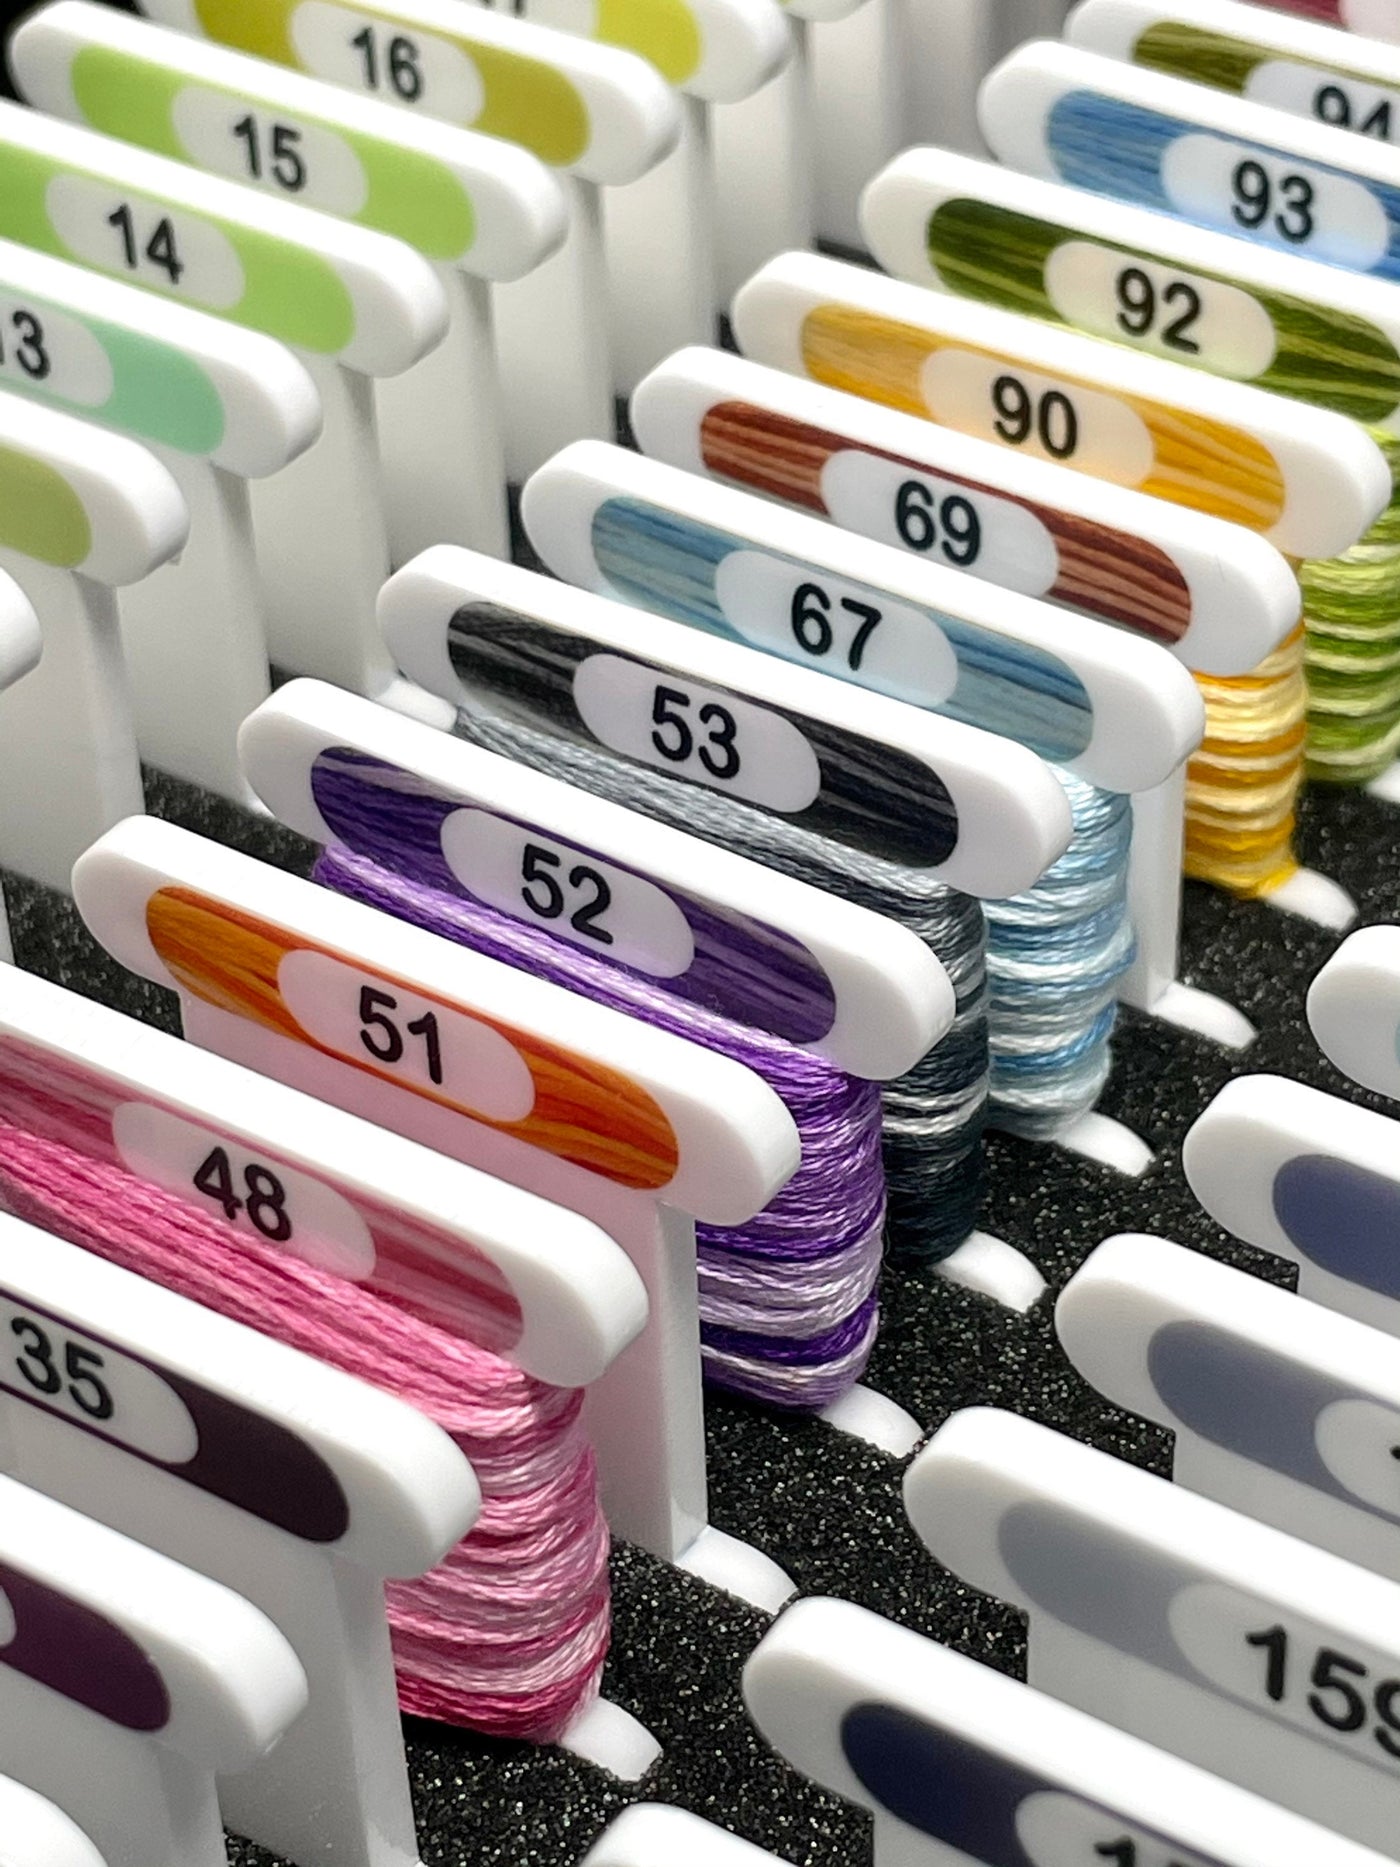 DMC 3mm acrylic bobbins with printed number and colours - small sets (84 bobbins)